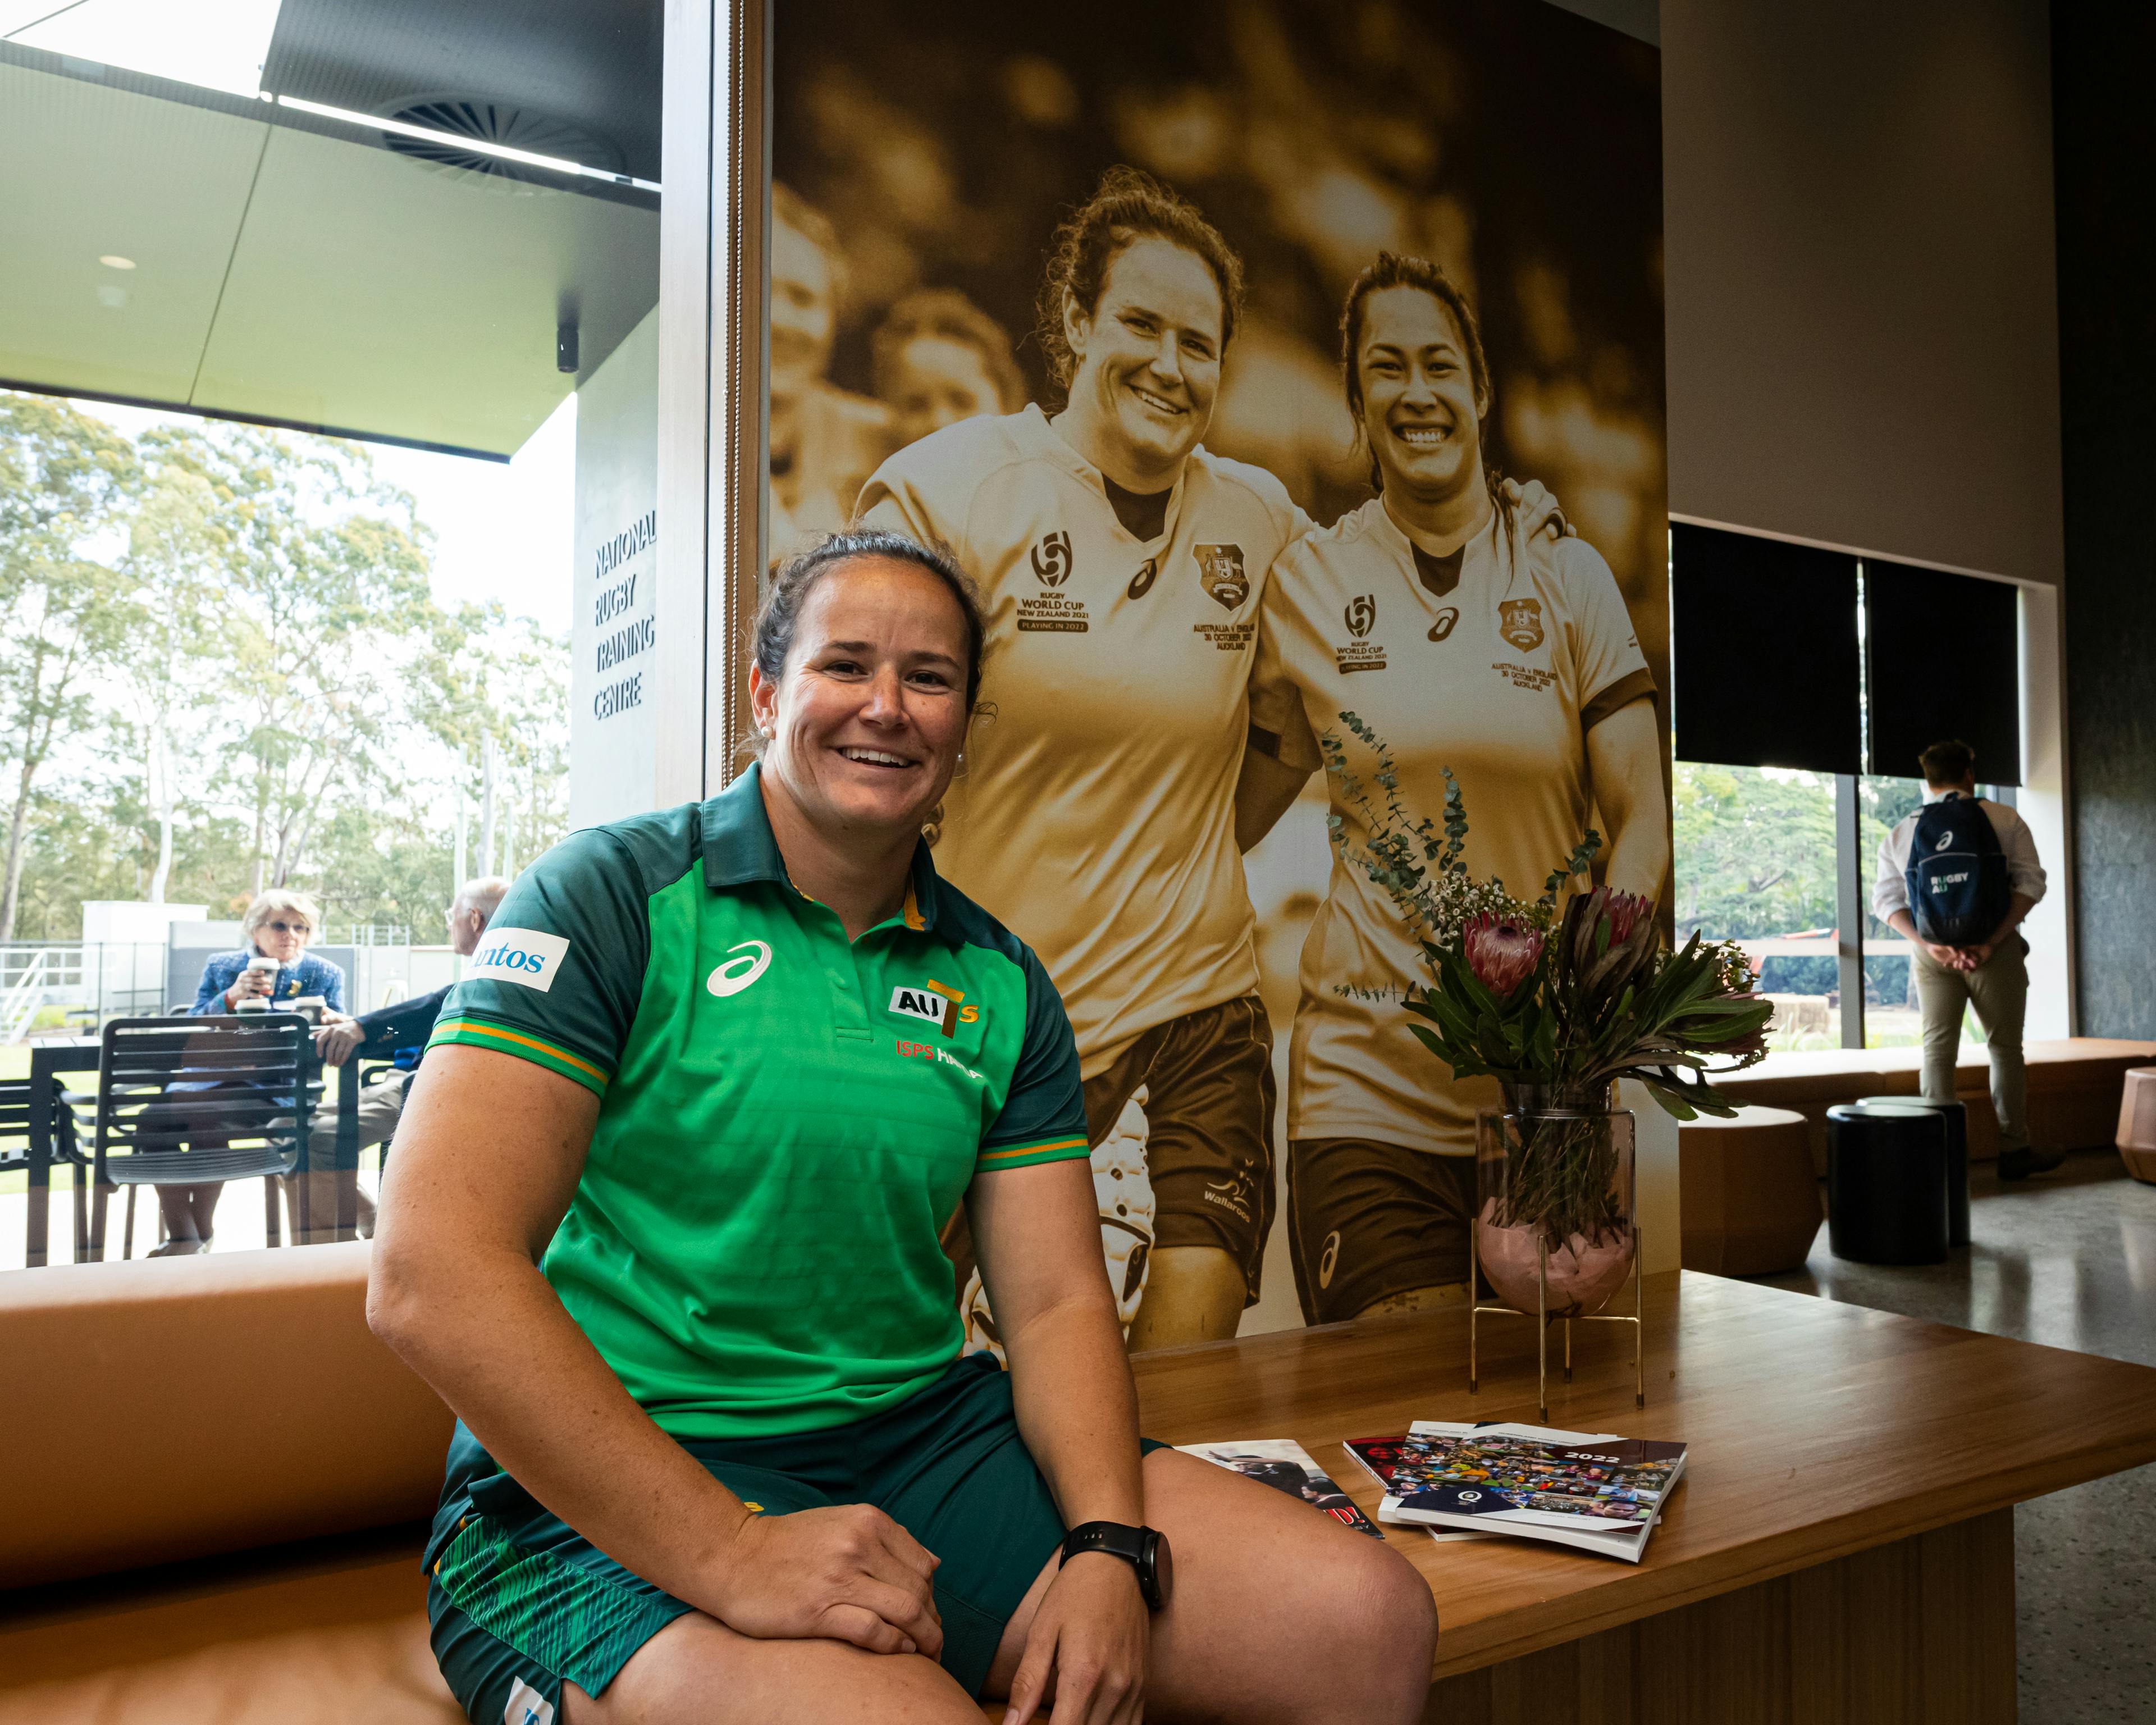 Shannon Parry with Shannon Parry as the Olympic Gold Medalist poses with a photo of herself and Liz Patu. Photo: Brenden Hertel/RA Media